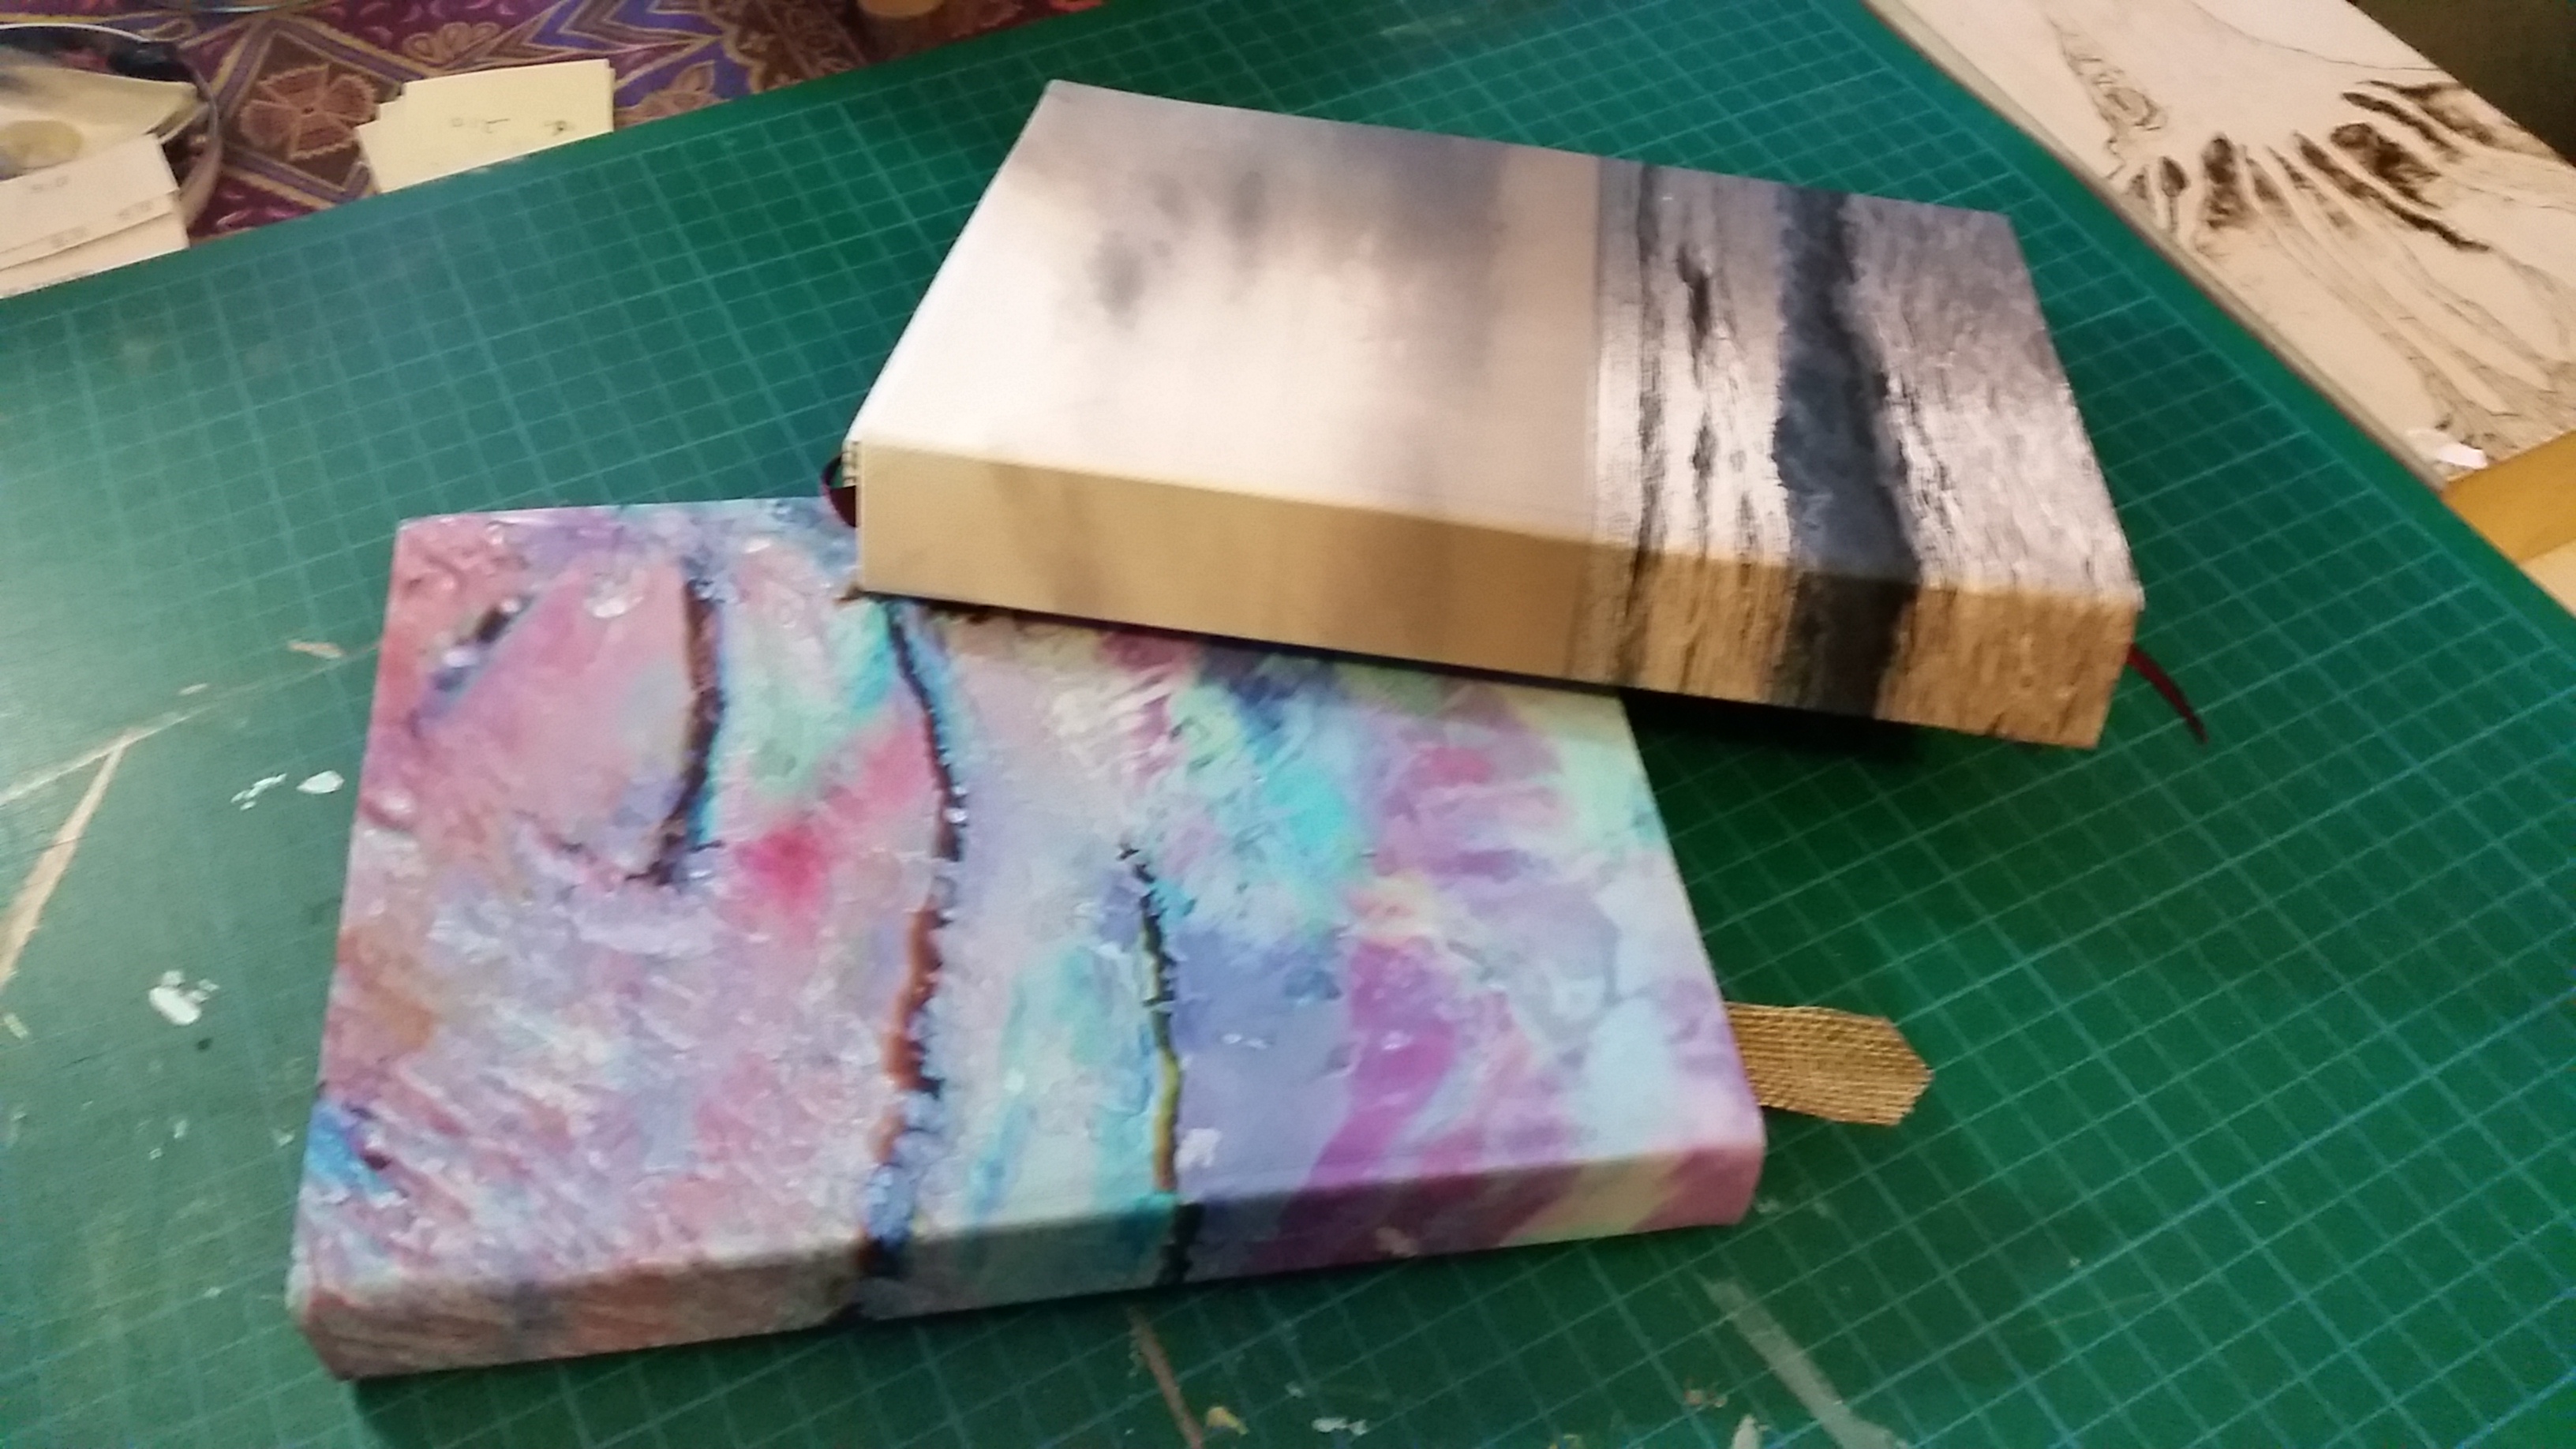 Making books from materials at home